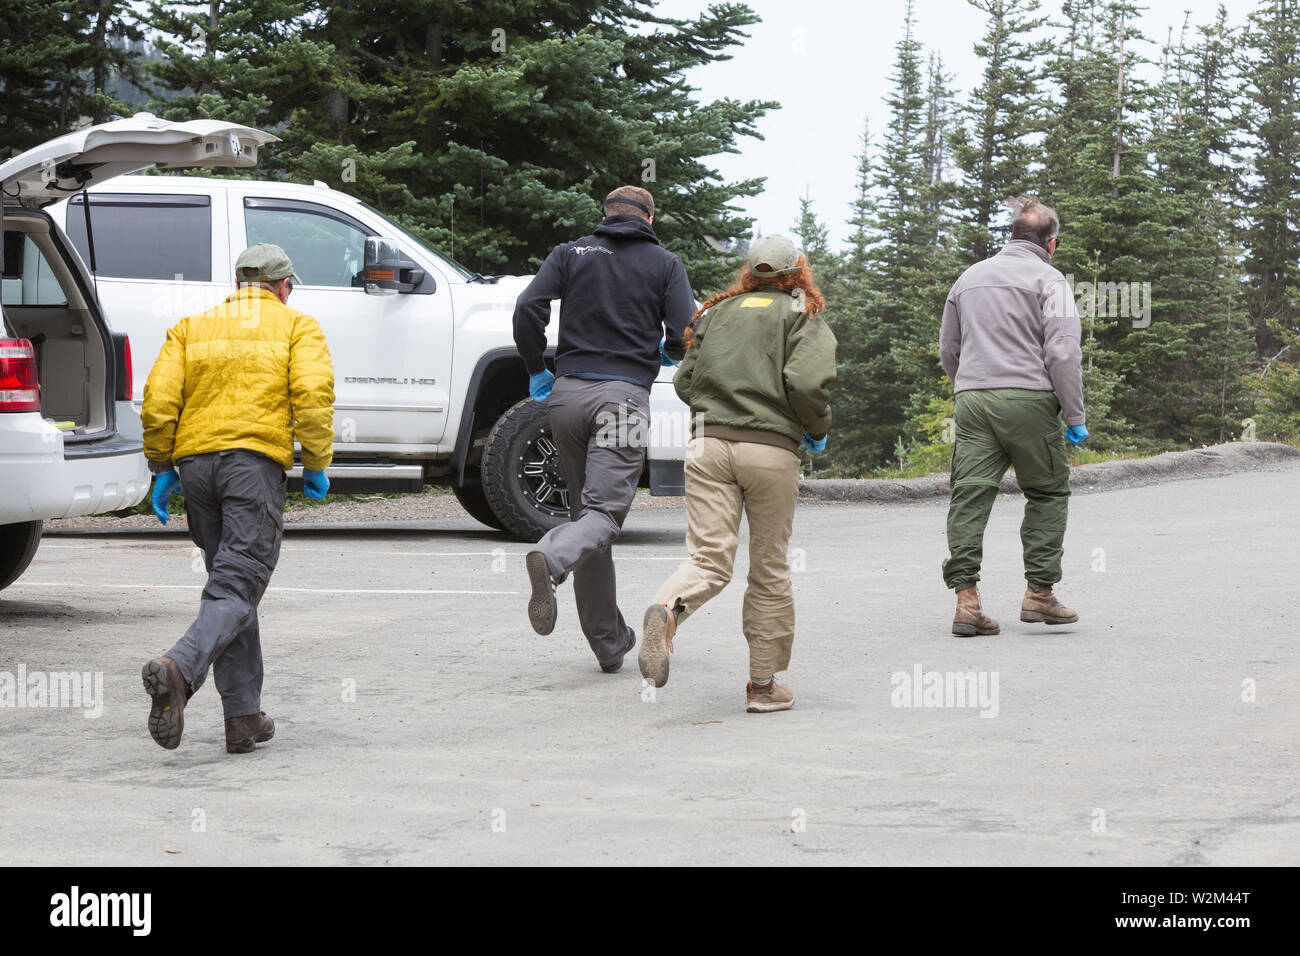 A team of rangers, employees and volunteers run to receive mountain goats during an airlift at Hurricane Ridge in Olympic National Park, Washington on July 9, 2019. Today is the second day of a two-week long capture and translocation process moving mountain goats from Olympic National Park to the northern Cascade Mountains. The effort is a collaboration between the National Park Service, the Washington Department of Fish & Wildlife and the USDA Forest Service to re-establish depleted populations of mountain goats in the Northern Cascades while also removing non-native goats from the Olympic Mo Stock Photo